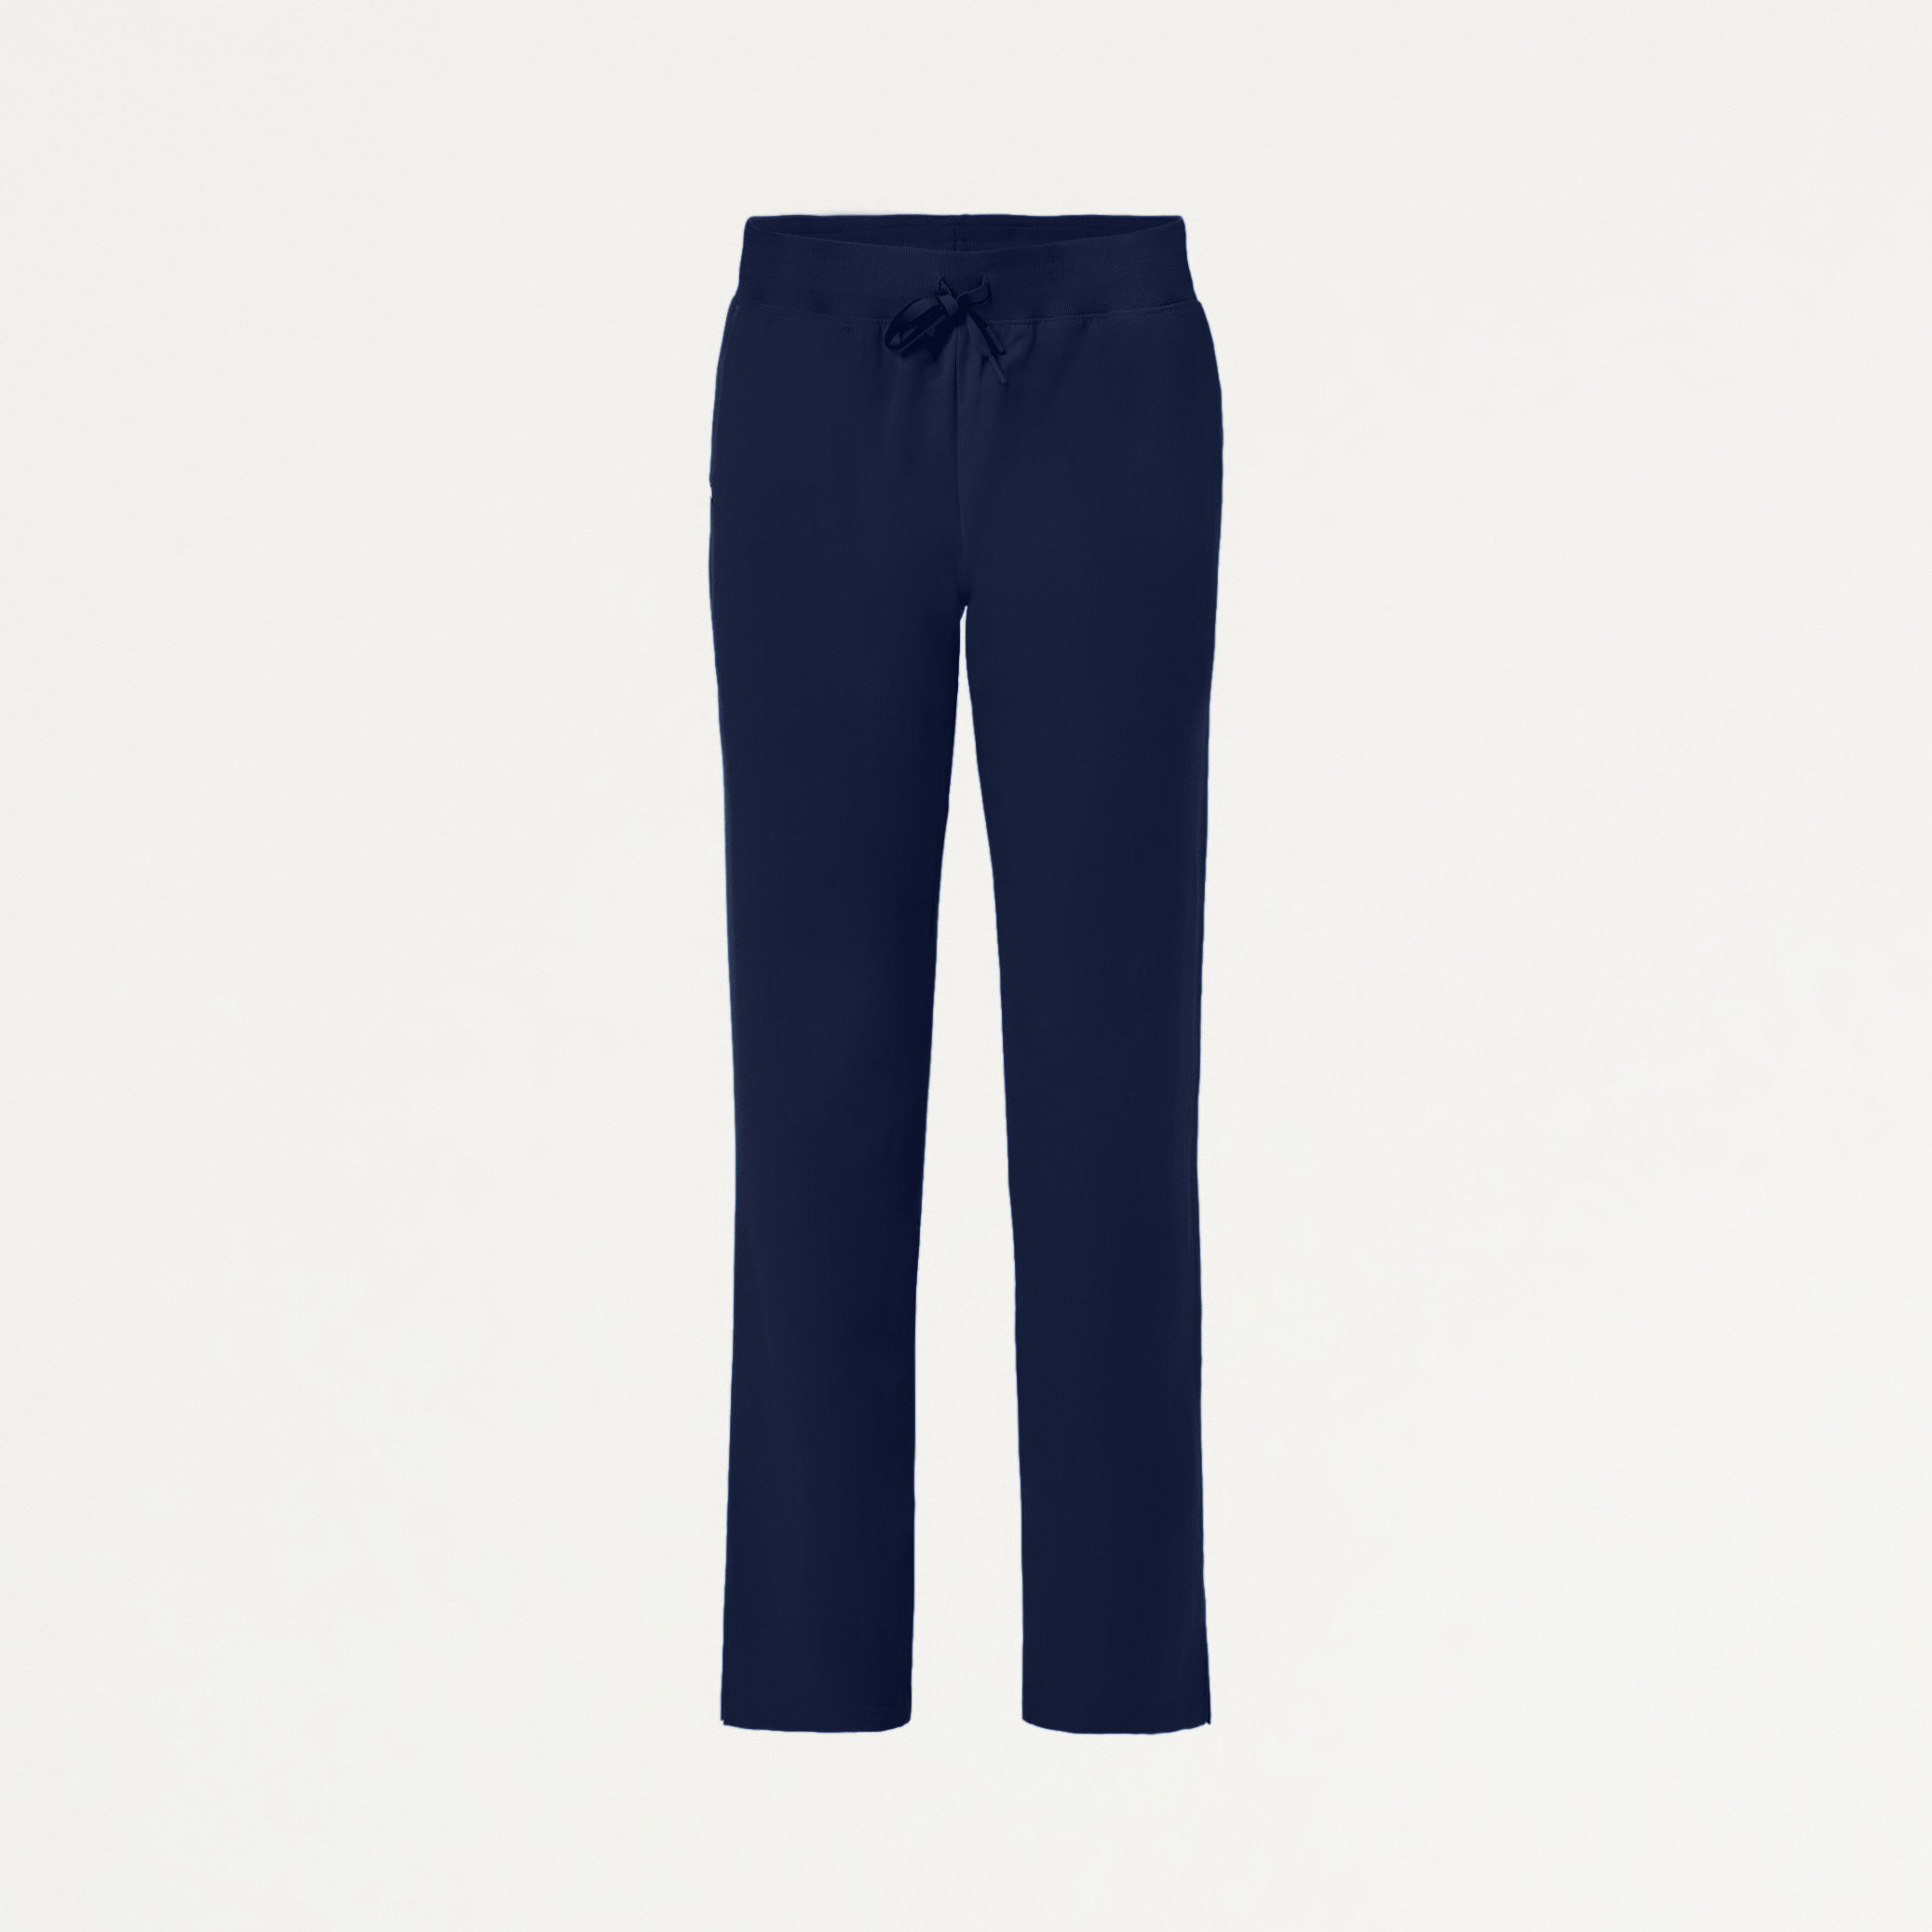 Buy Navy Blue Men Pant Cotton Handloom for Best Price, Reviews, Free  Shipping